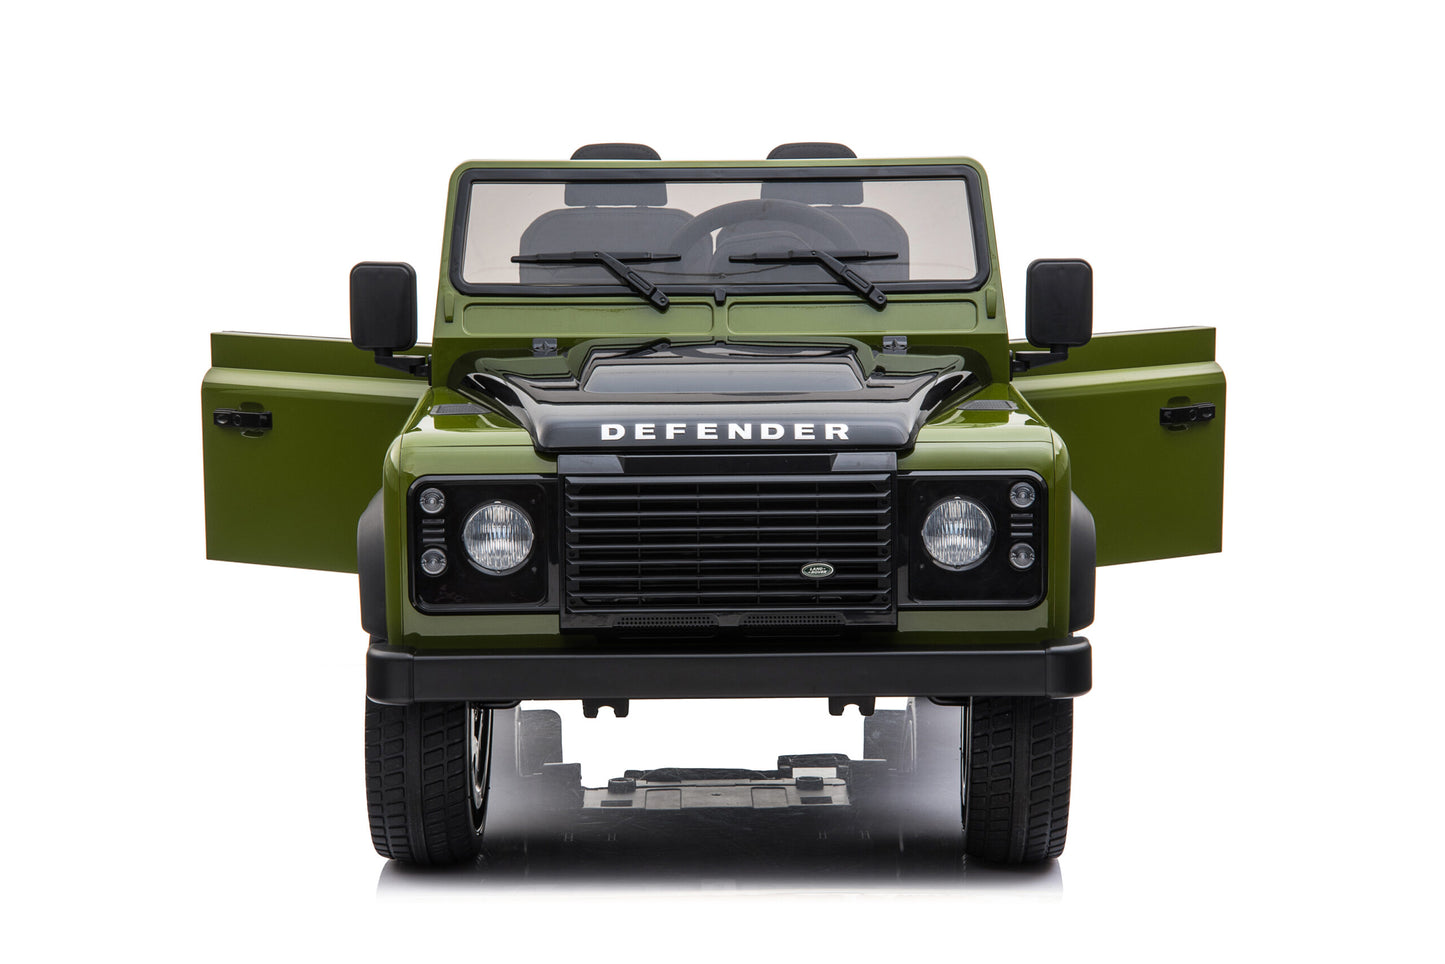 landrover2seater-resize(5)